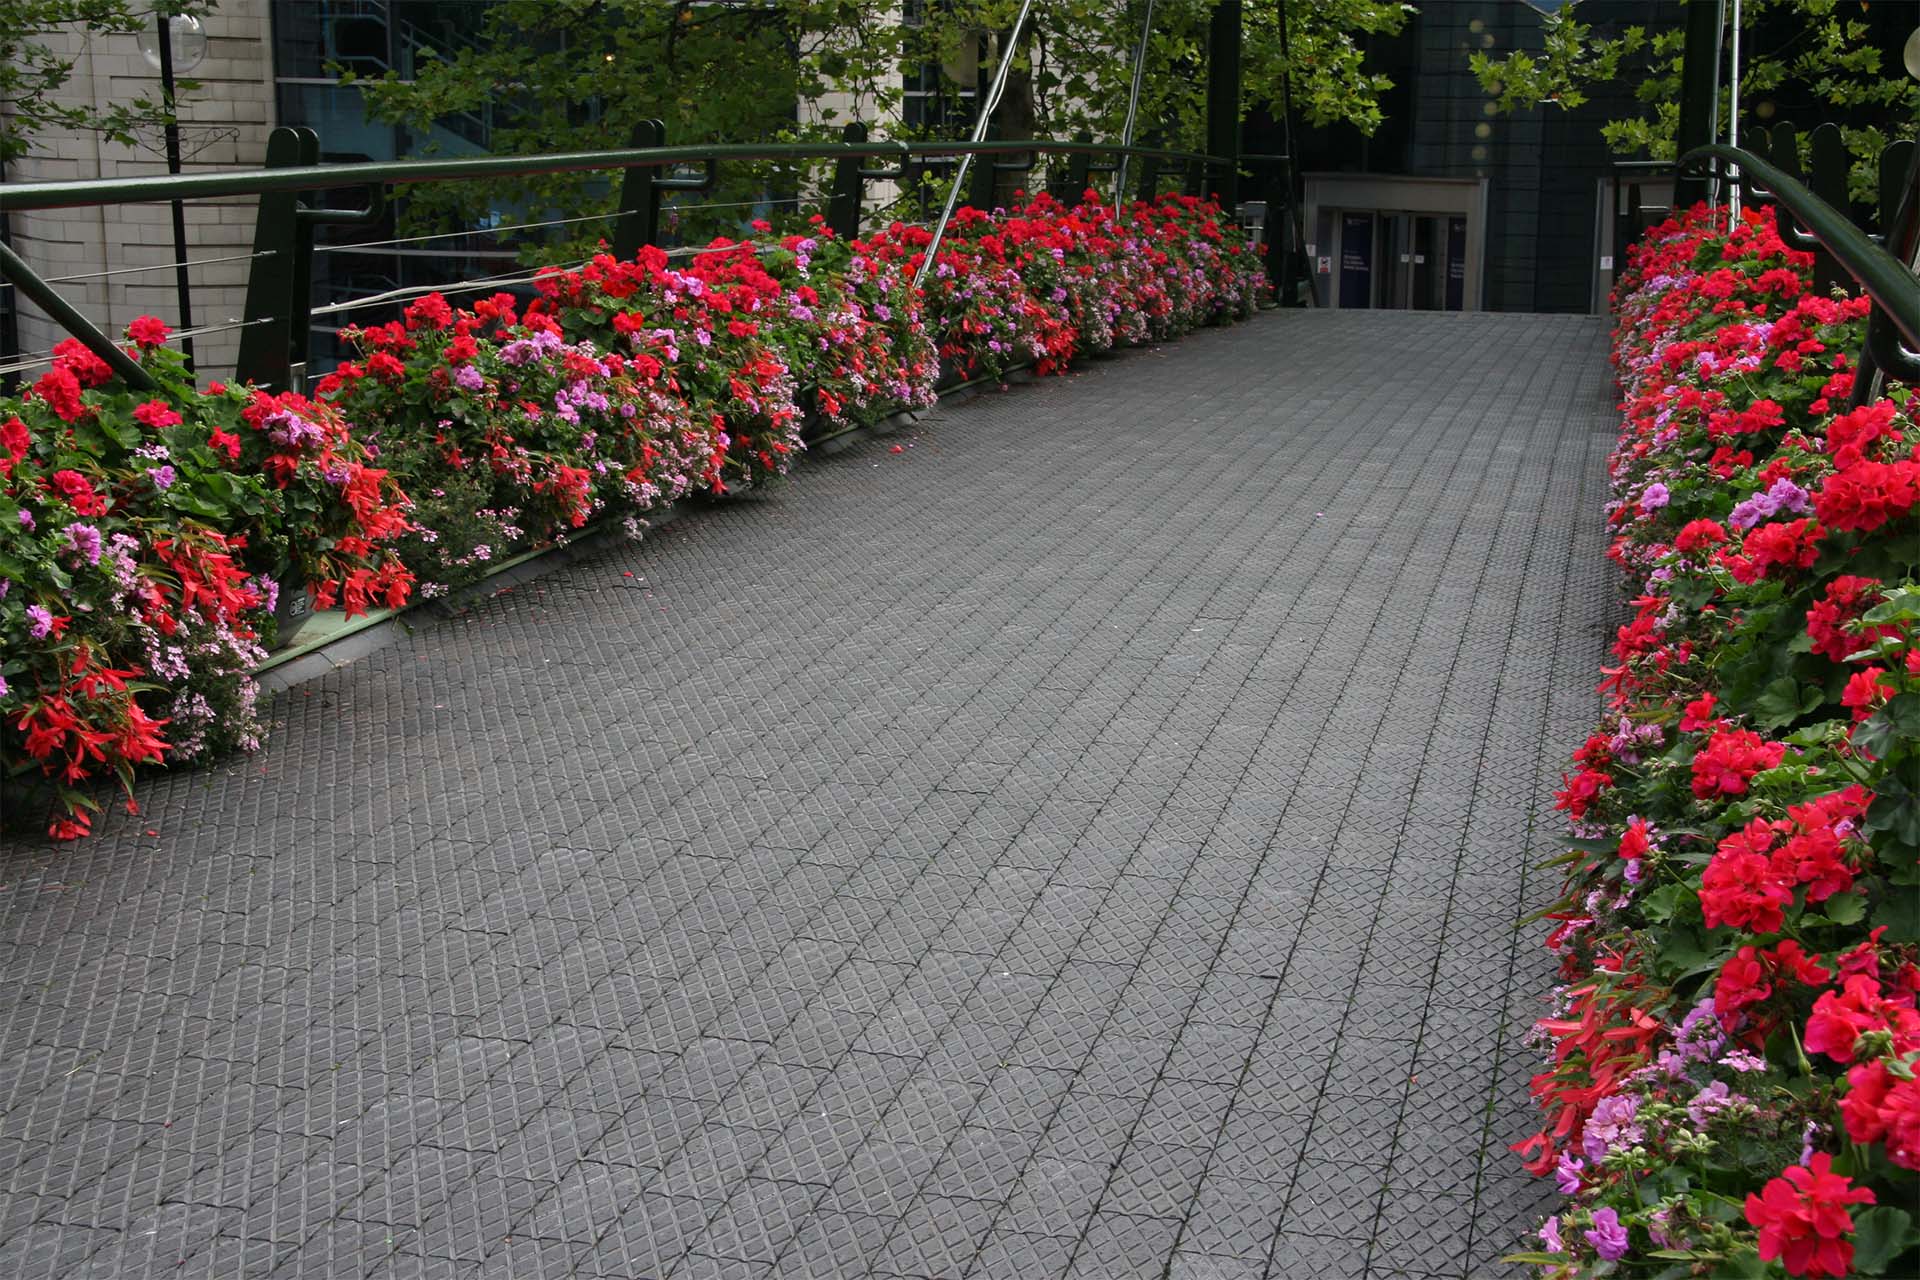 Diamond chequer pavers in Brindley Place Birmingham